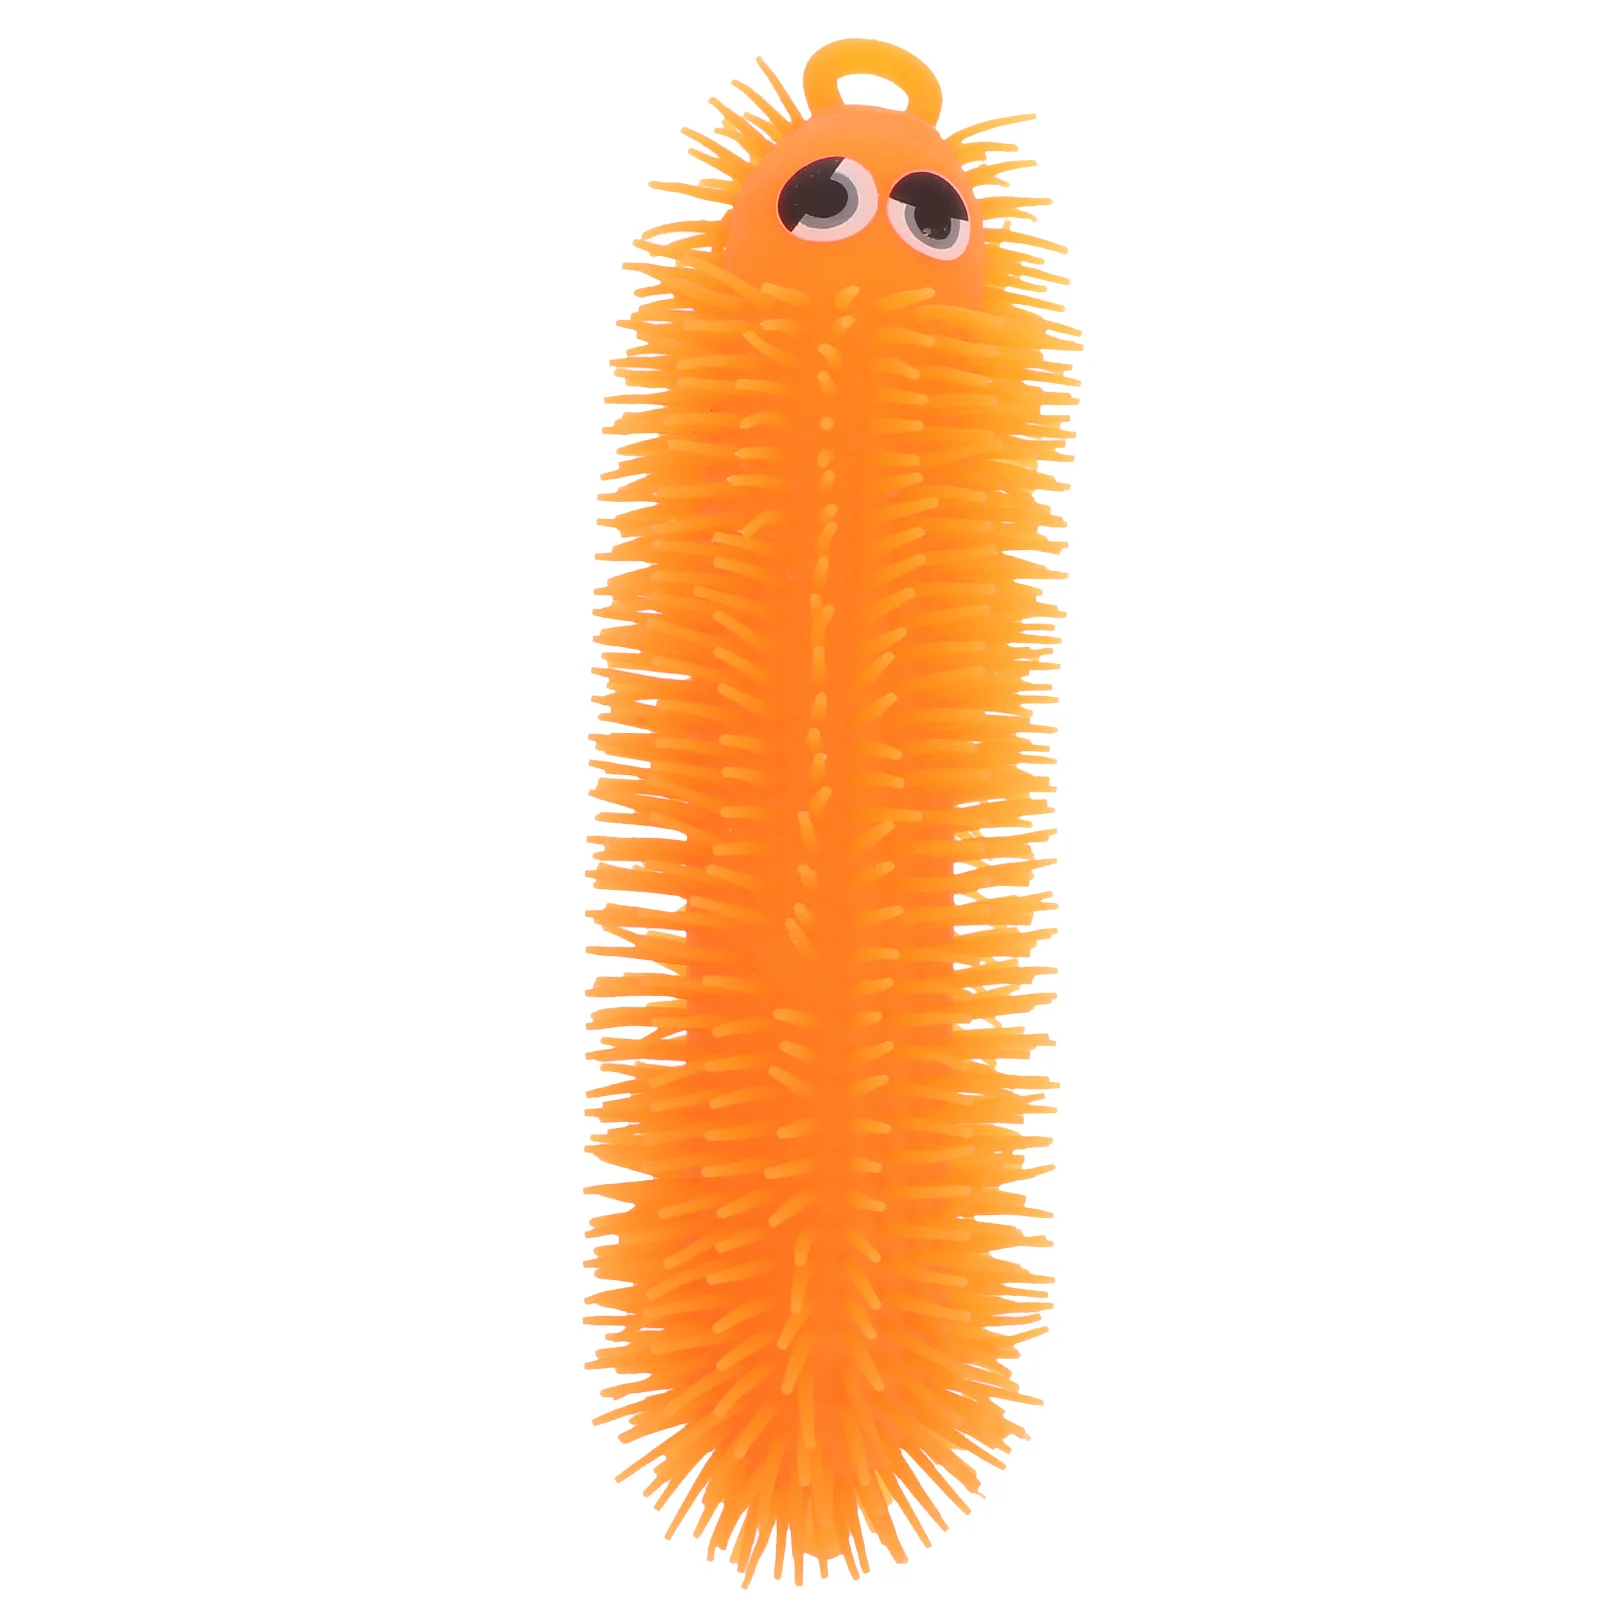 

Flashing Light Stretchy Caterpillars, Stress Balls, and Toys for Adults Teen Kids ( )